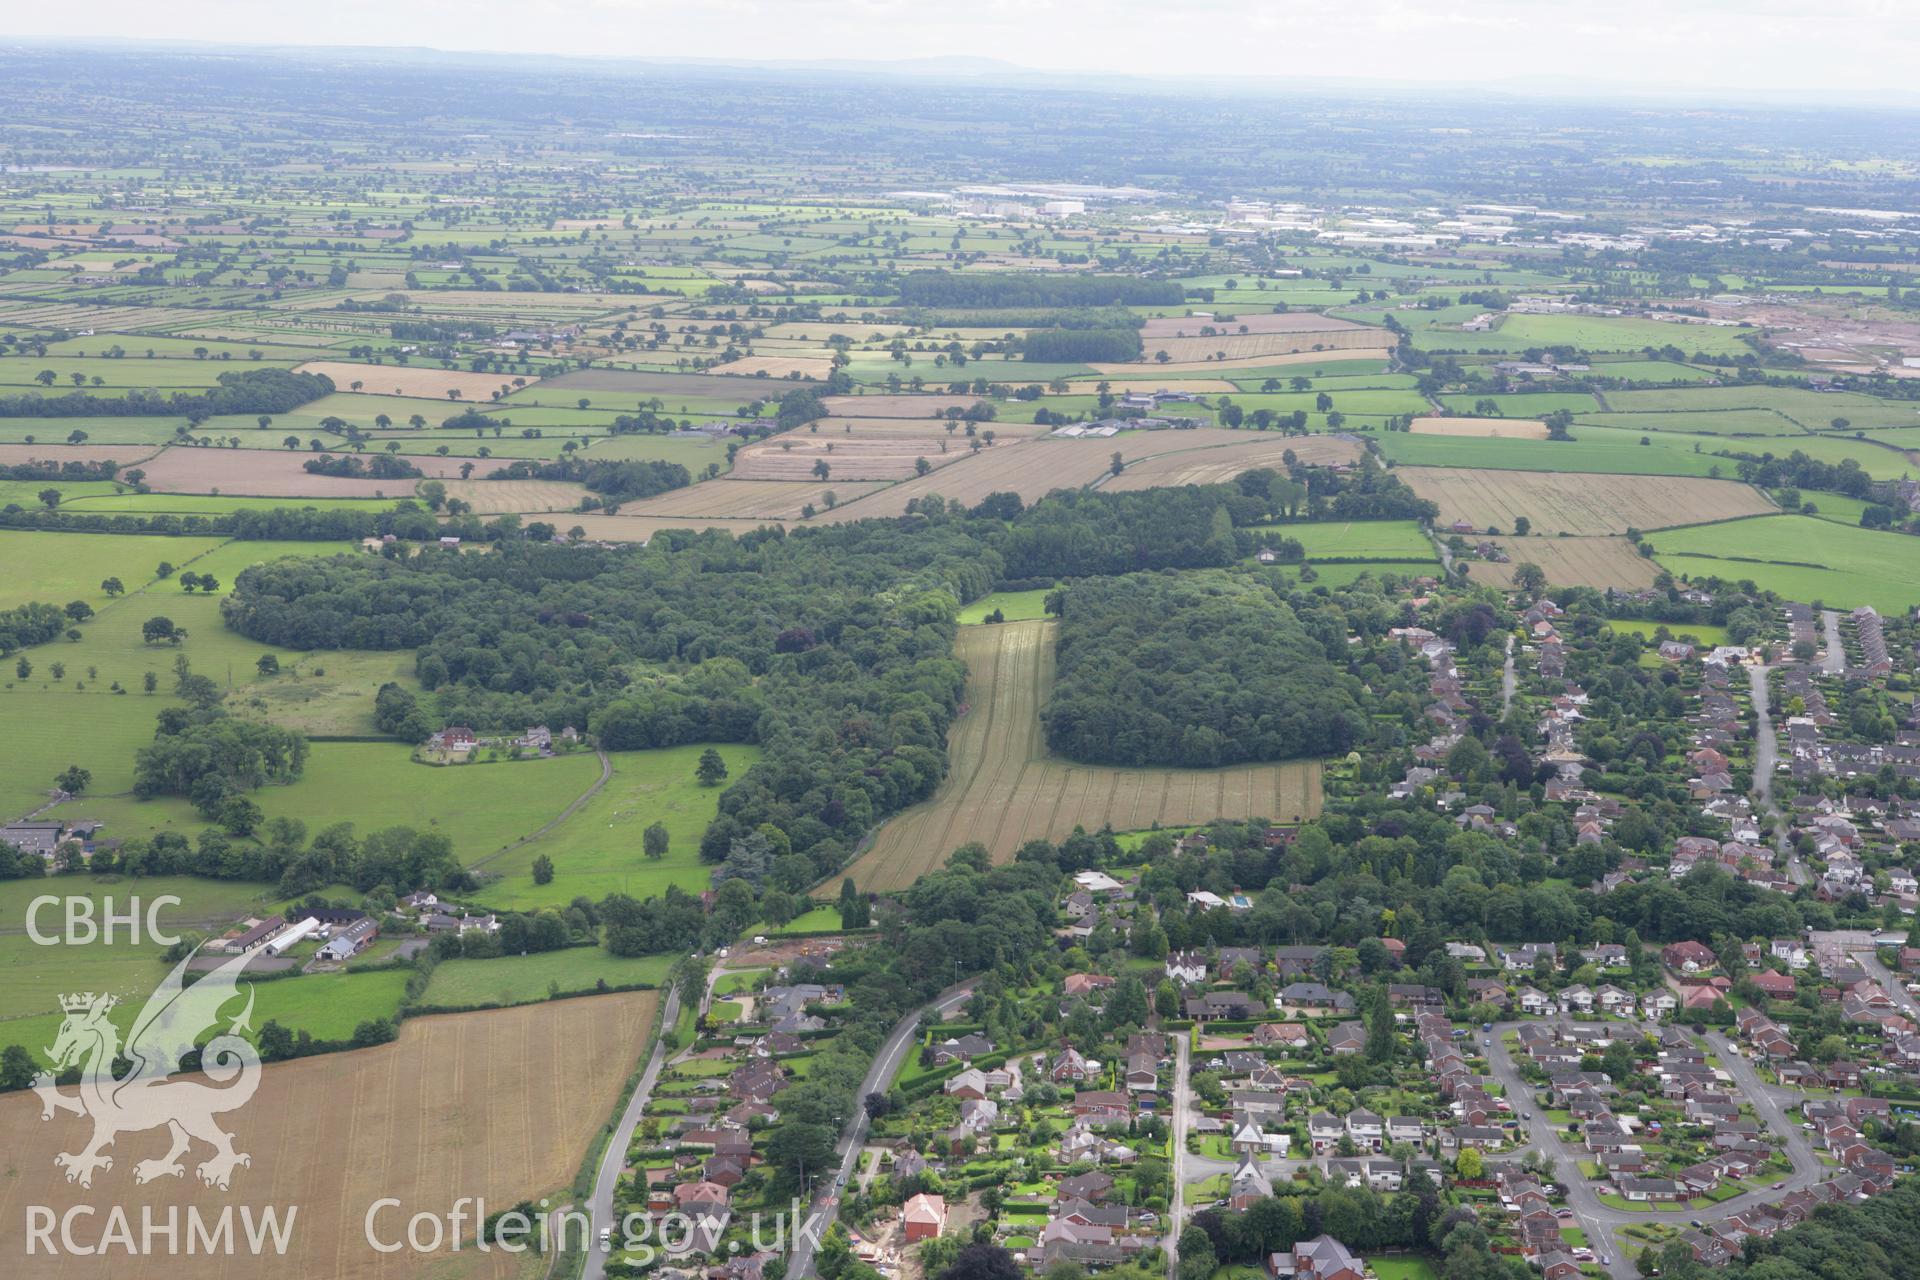 RCAHMW colour oblique aerial photograph showing suburban edge of Wrexham with Park Leigh Farm and Horsley Hall and Garden. Taken on 24 July 2007 by Toby Driver